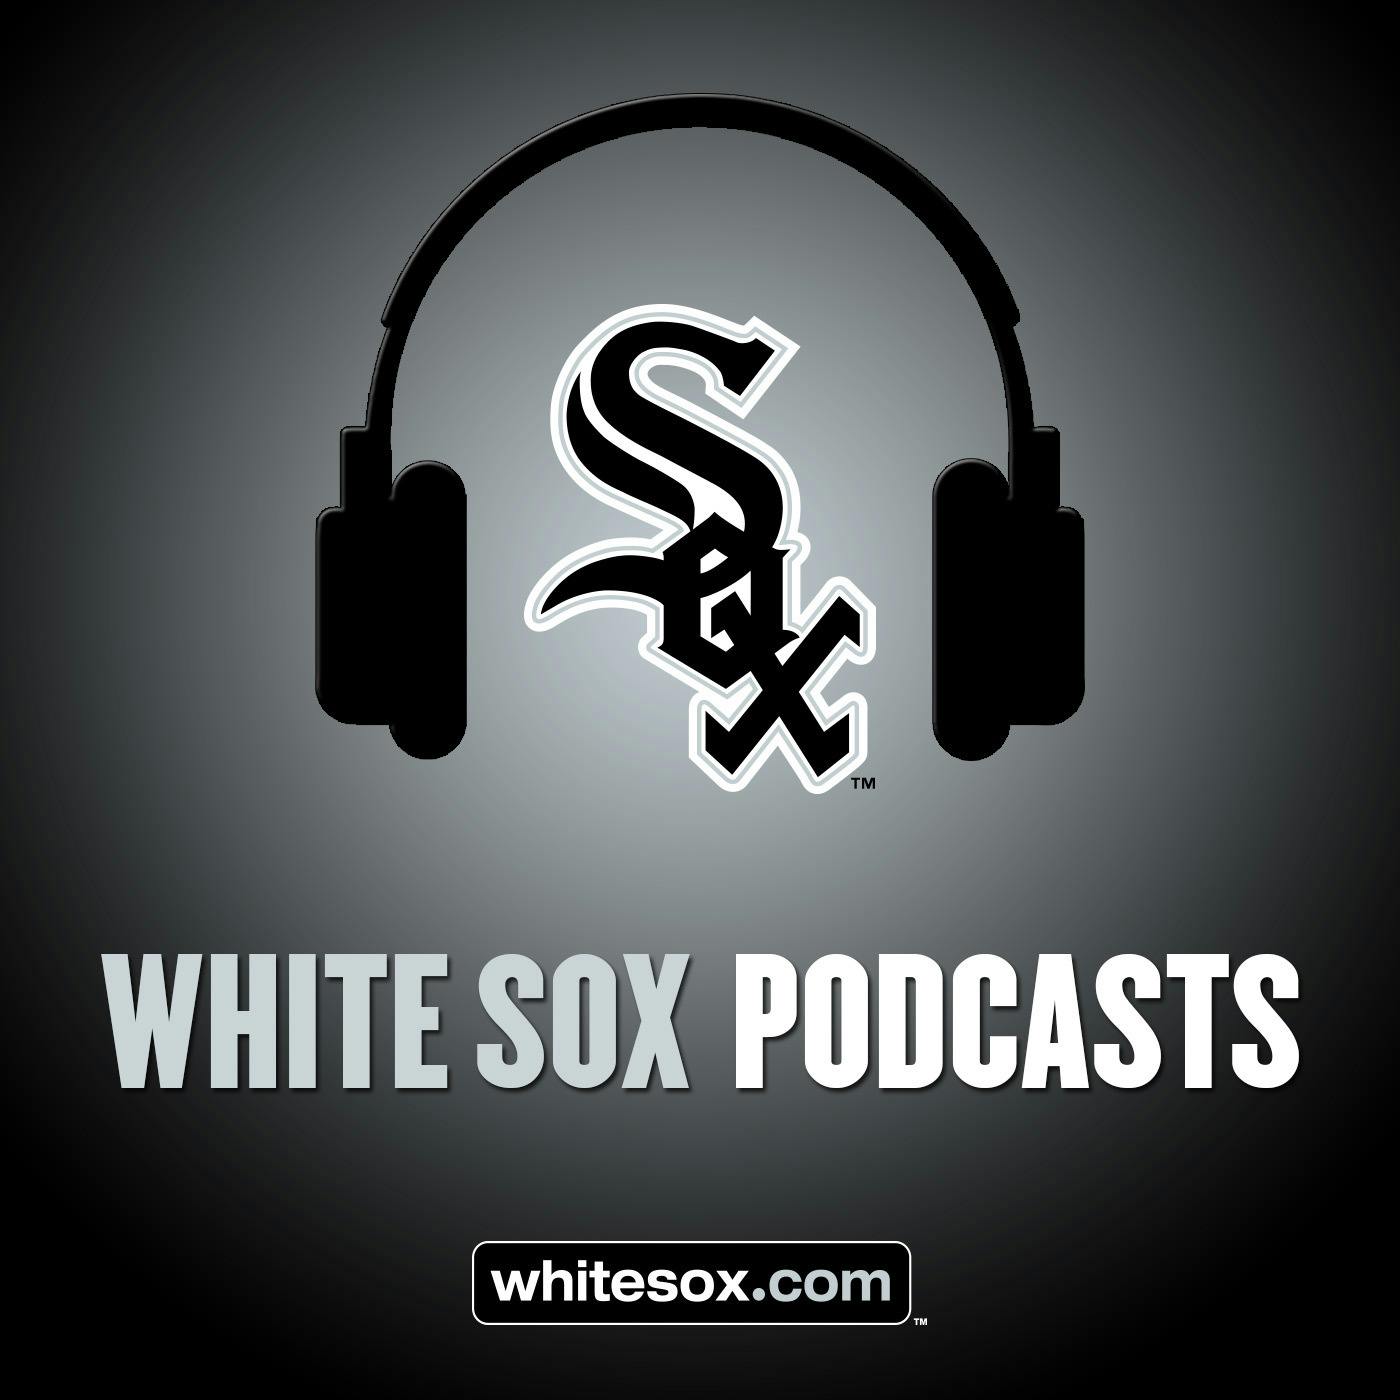 6/30/19: White Sox Weekly